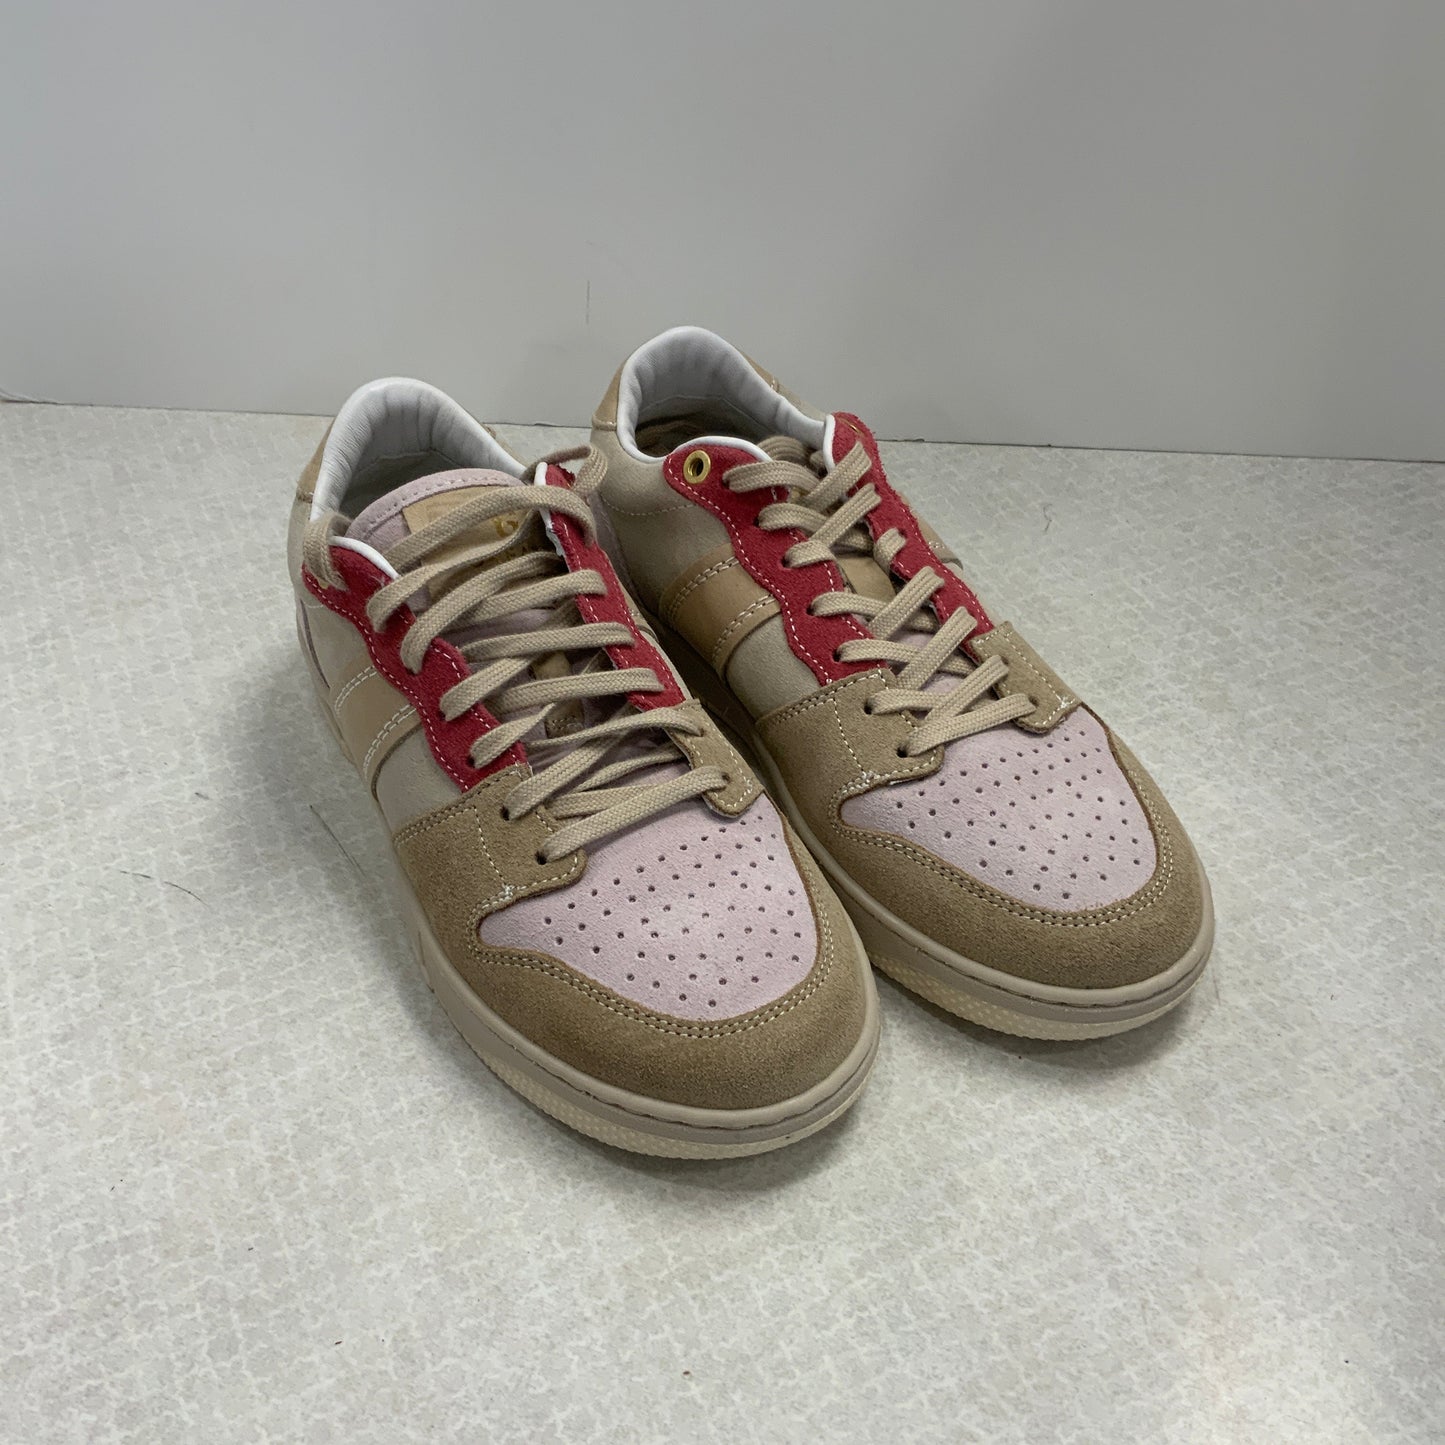 Pink & Tan Shoes Sneakers Great, Size 8